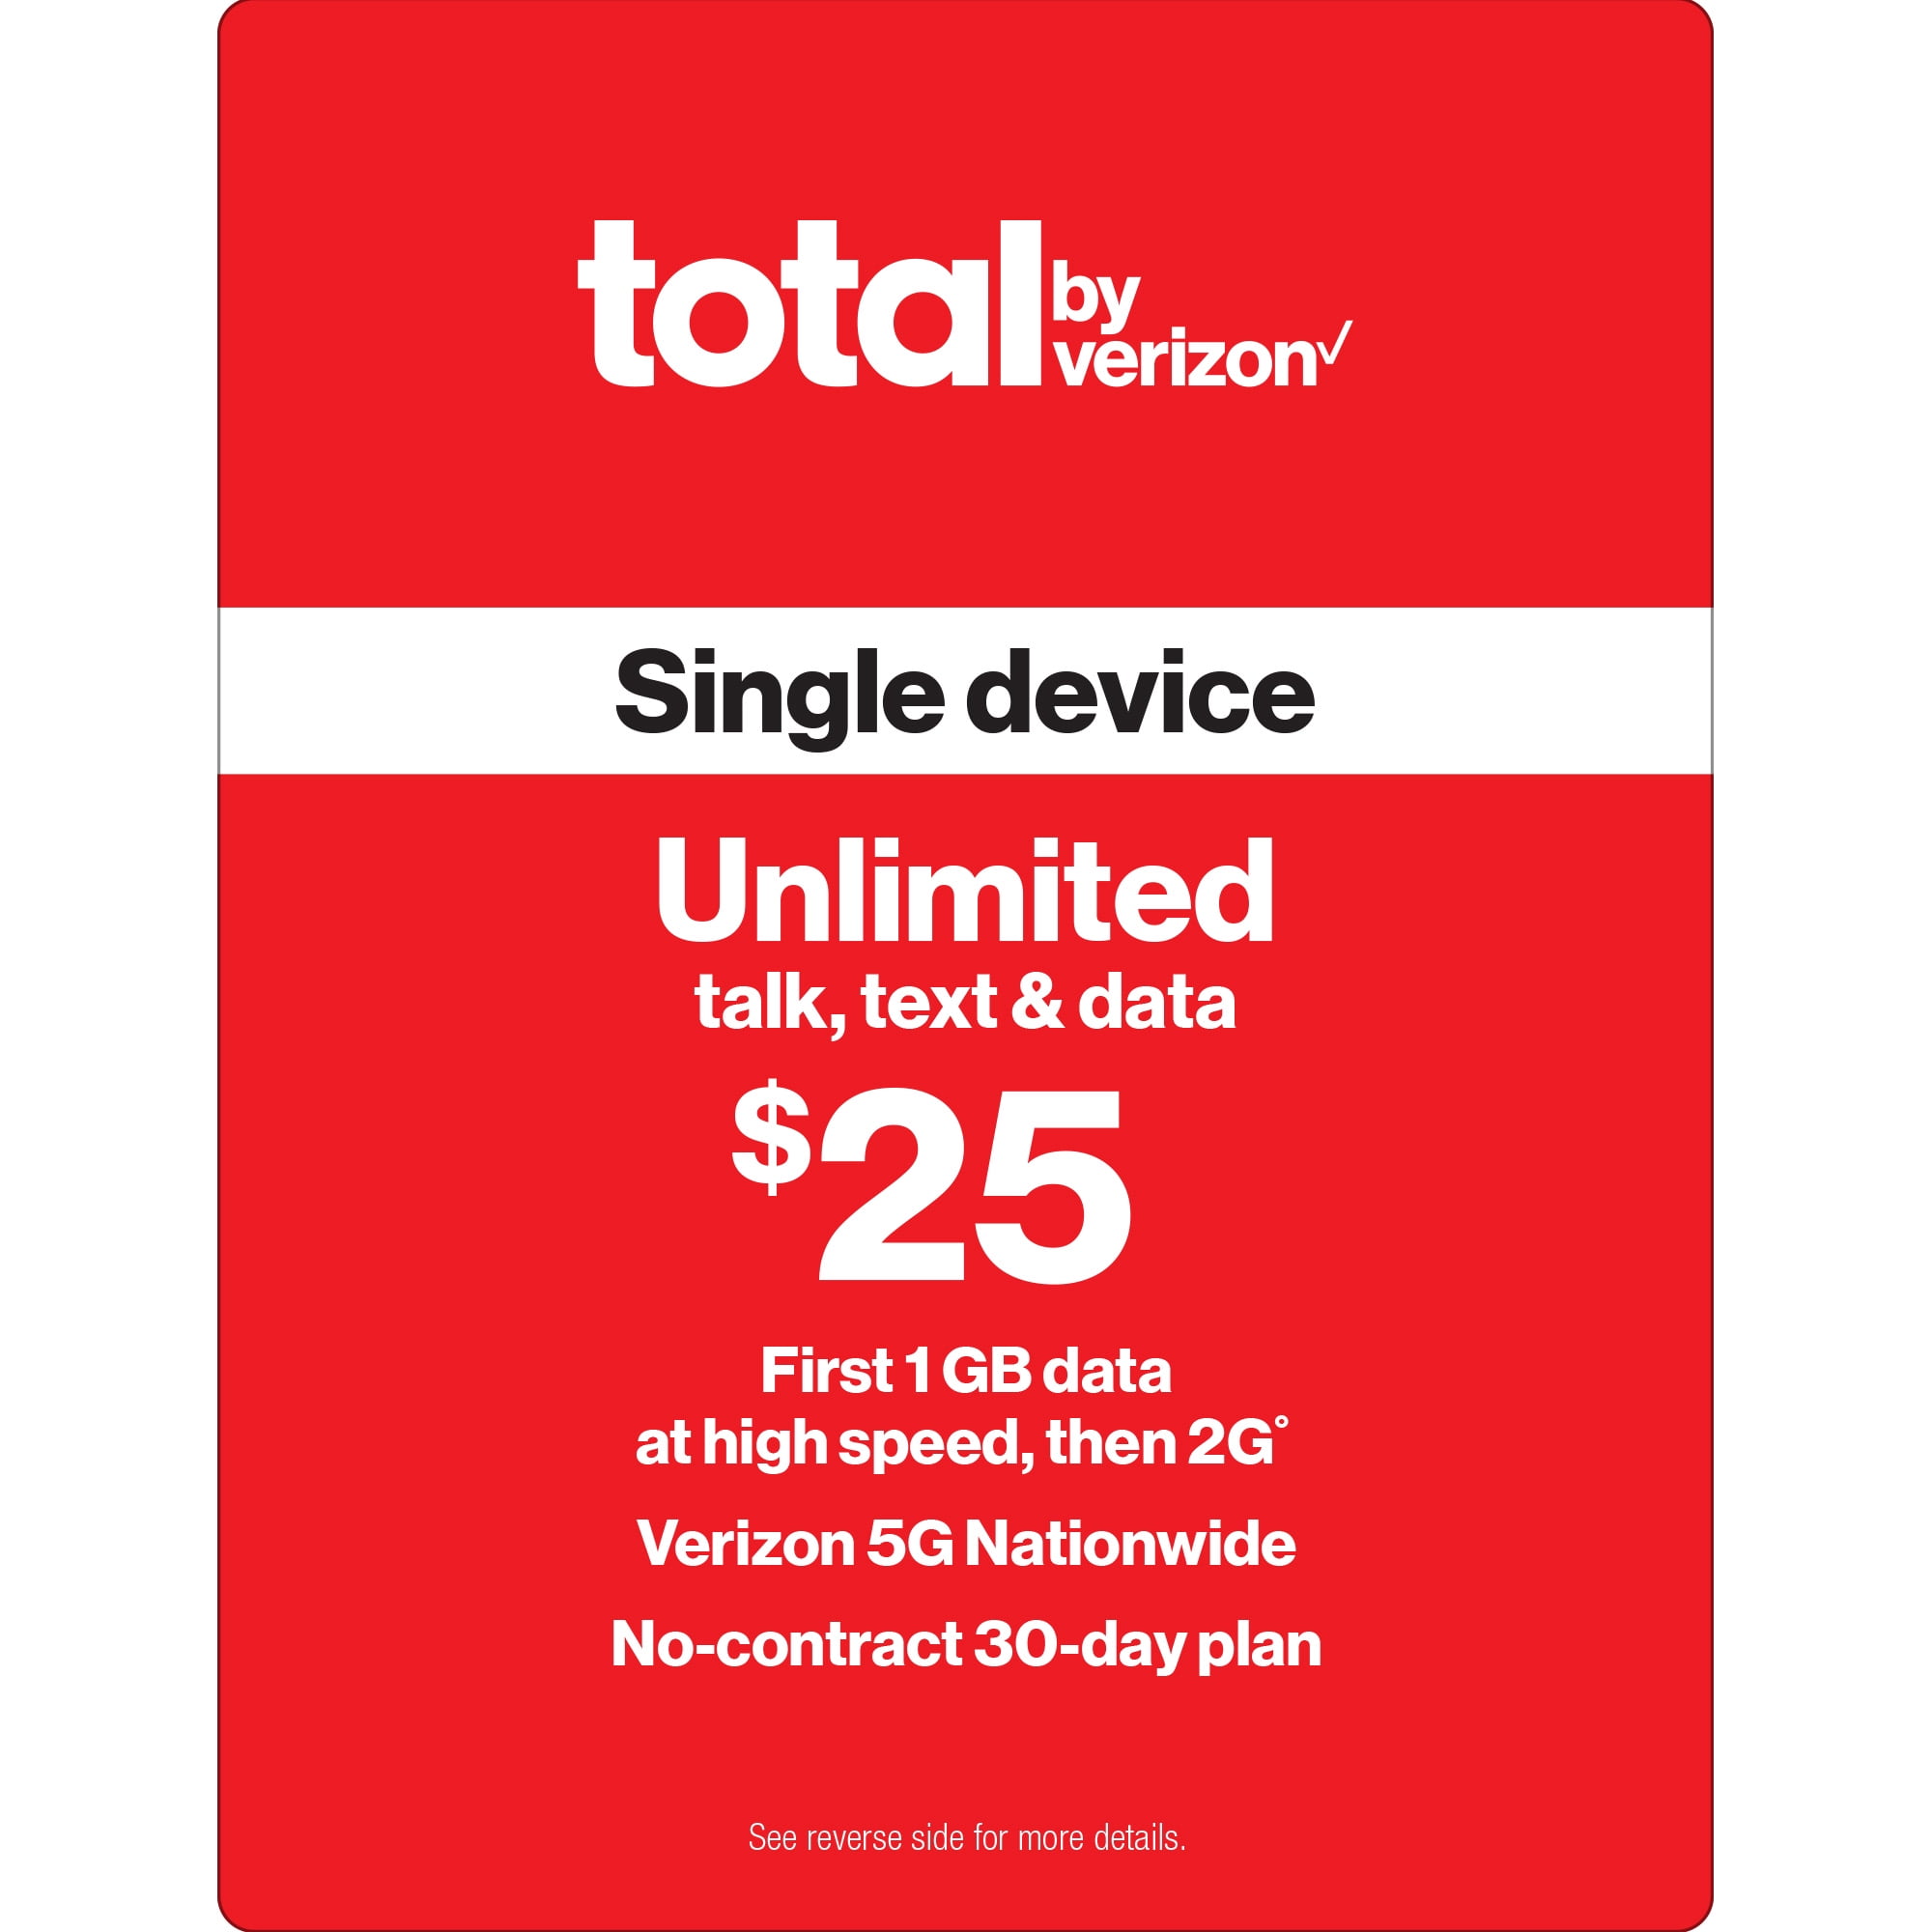 total-by-verizon-25-unlimited-tak-text-single-device-30-day-prepaid